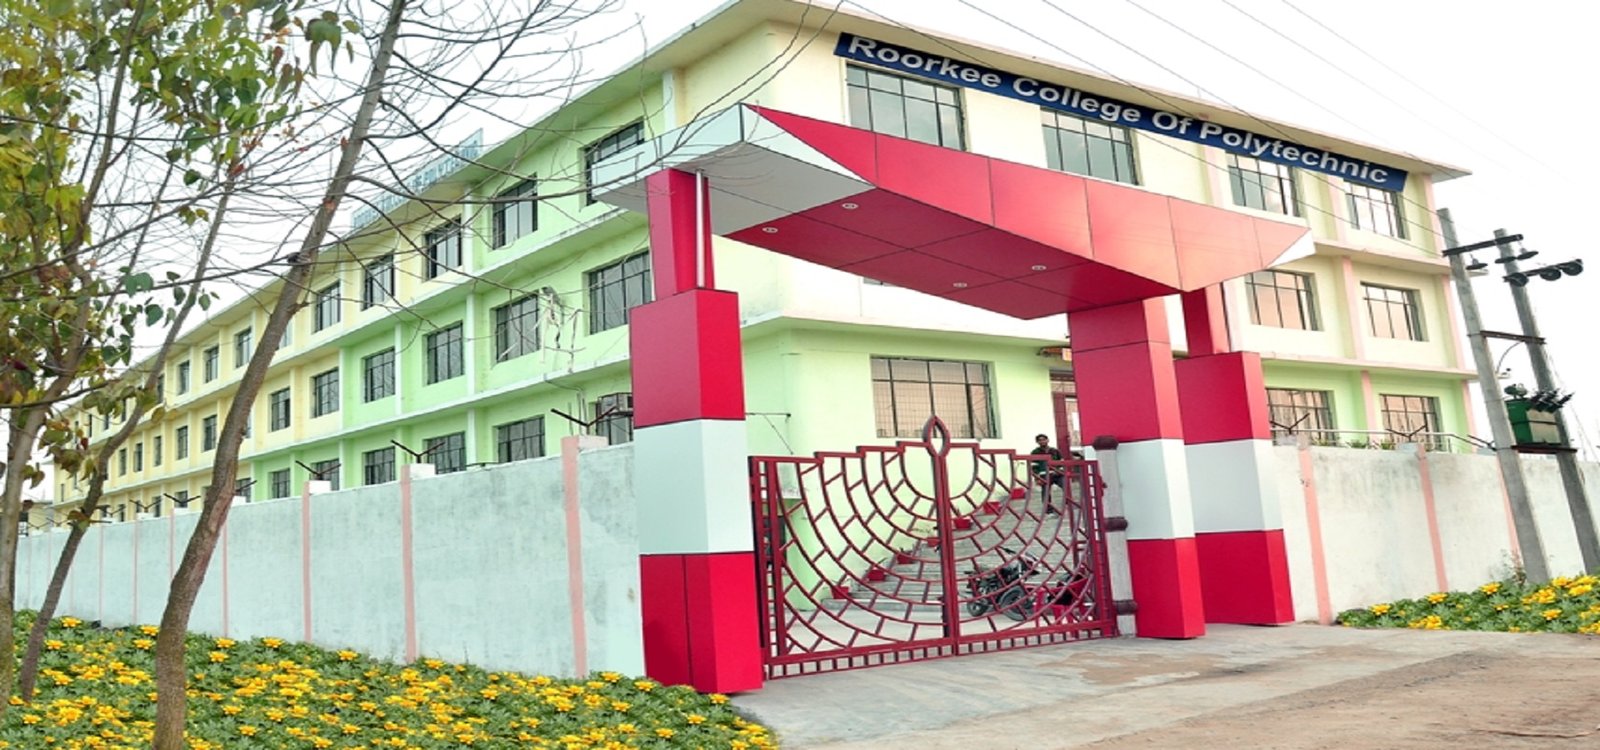 ROORKEE COLLEGE OF POLYTECHNIC